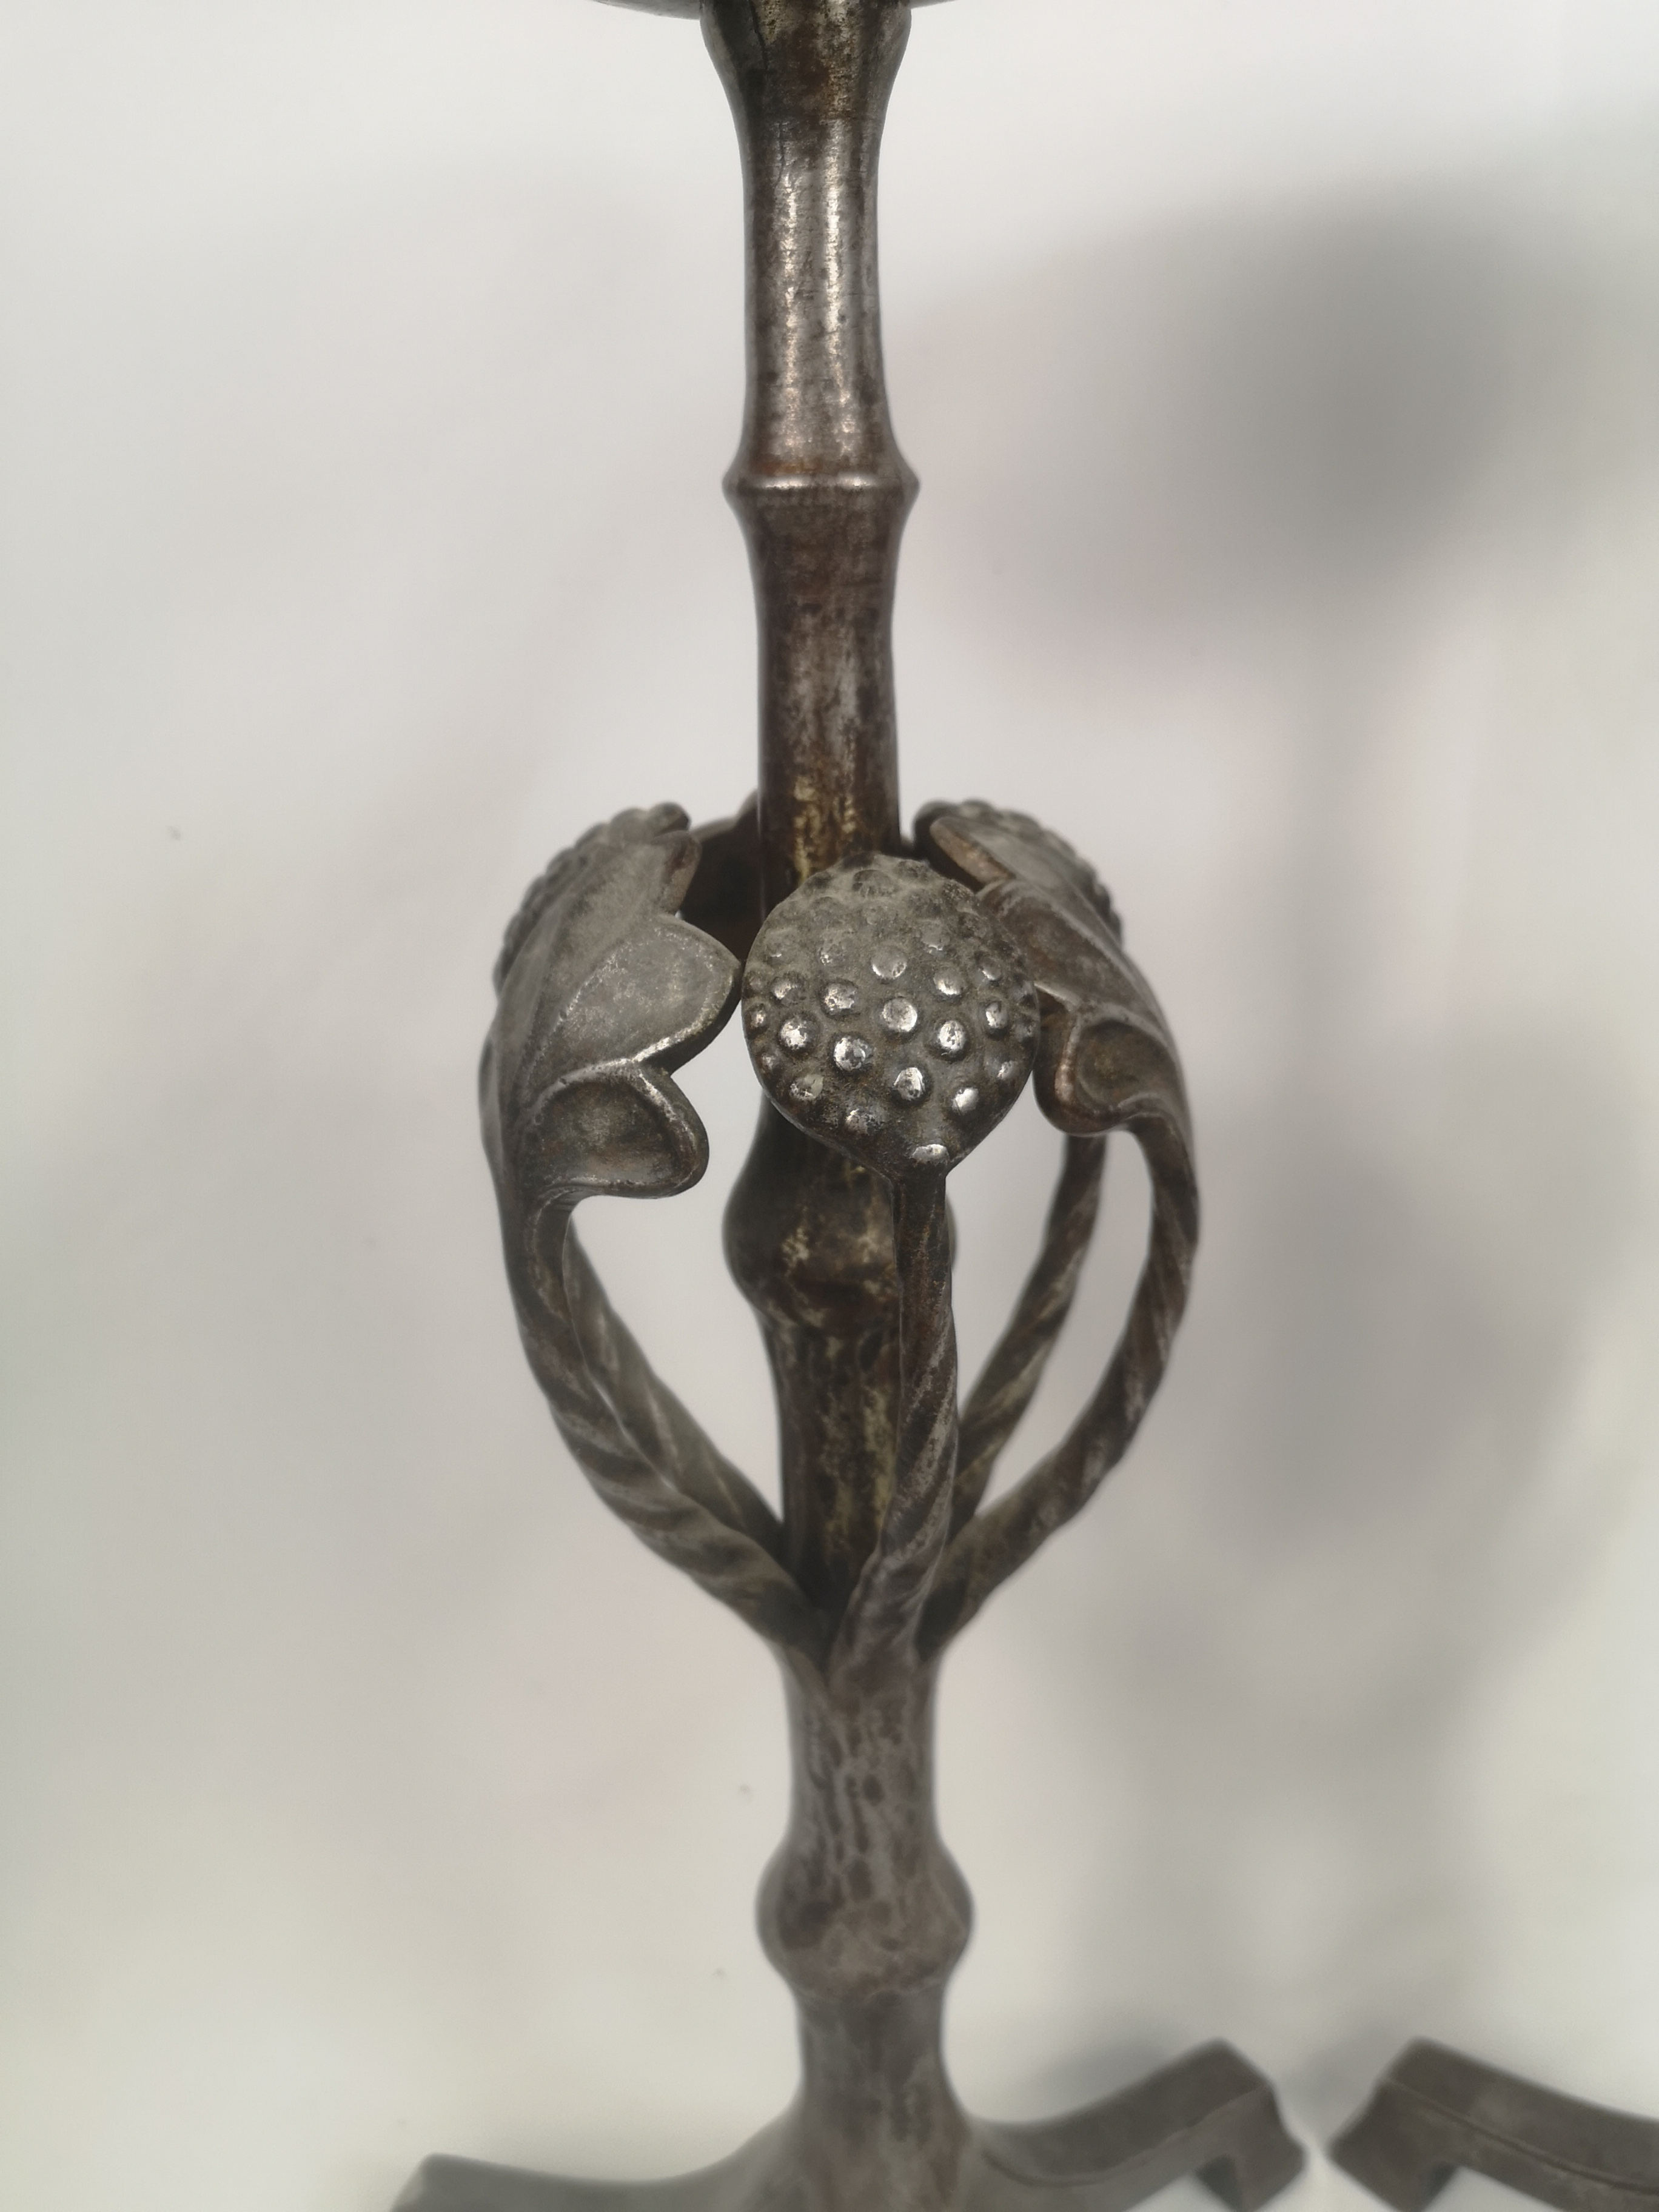 Pair of steel church candlesticks - Image 2 of 4